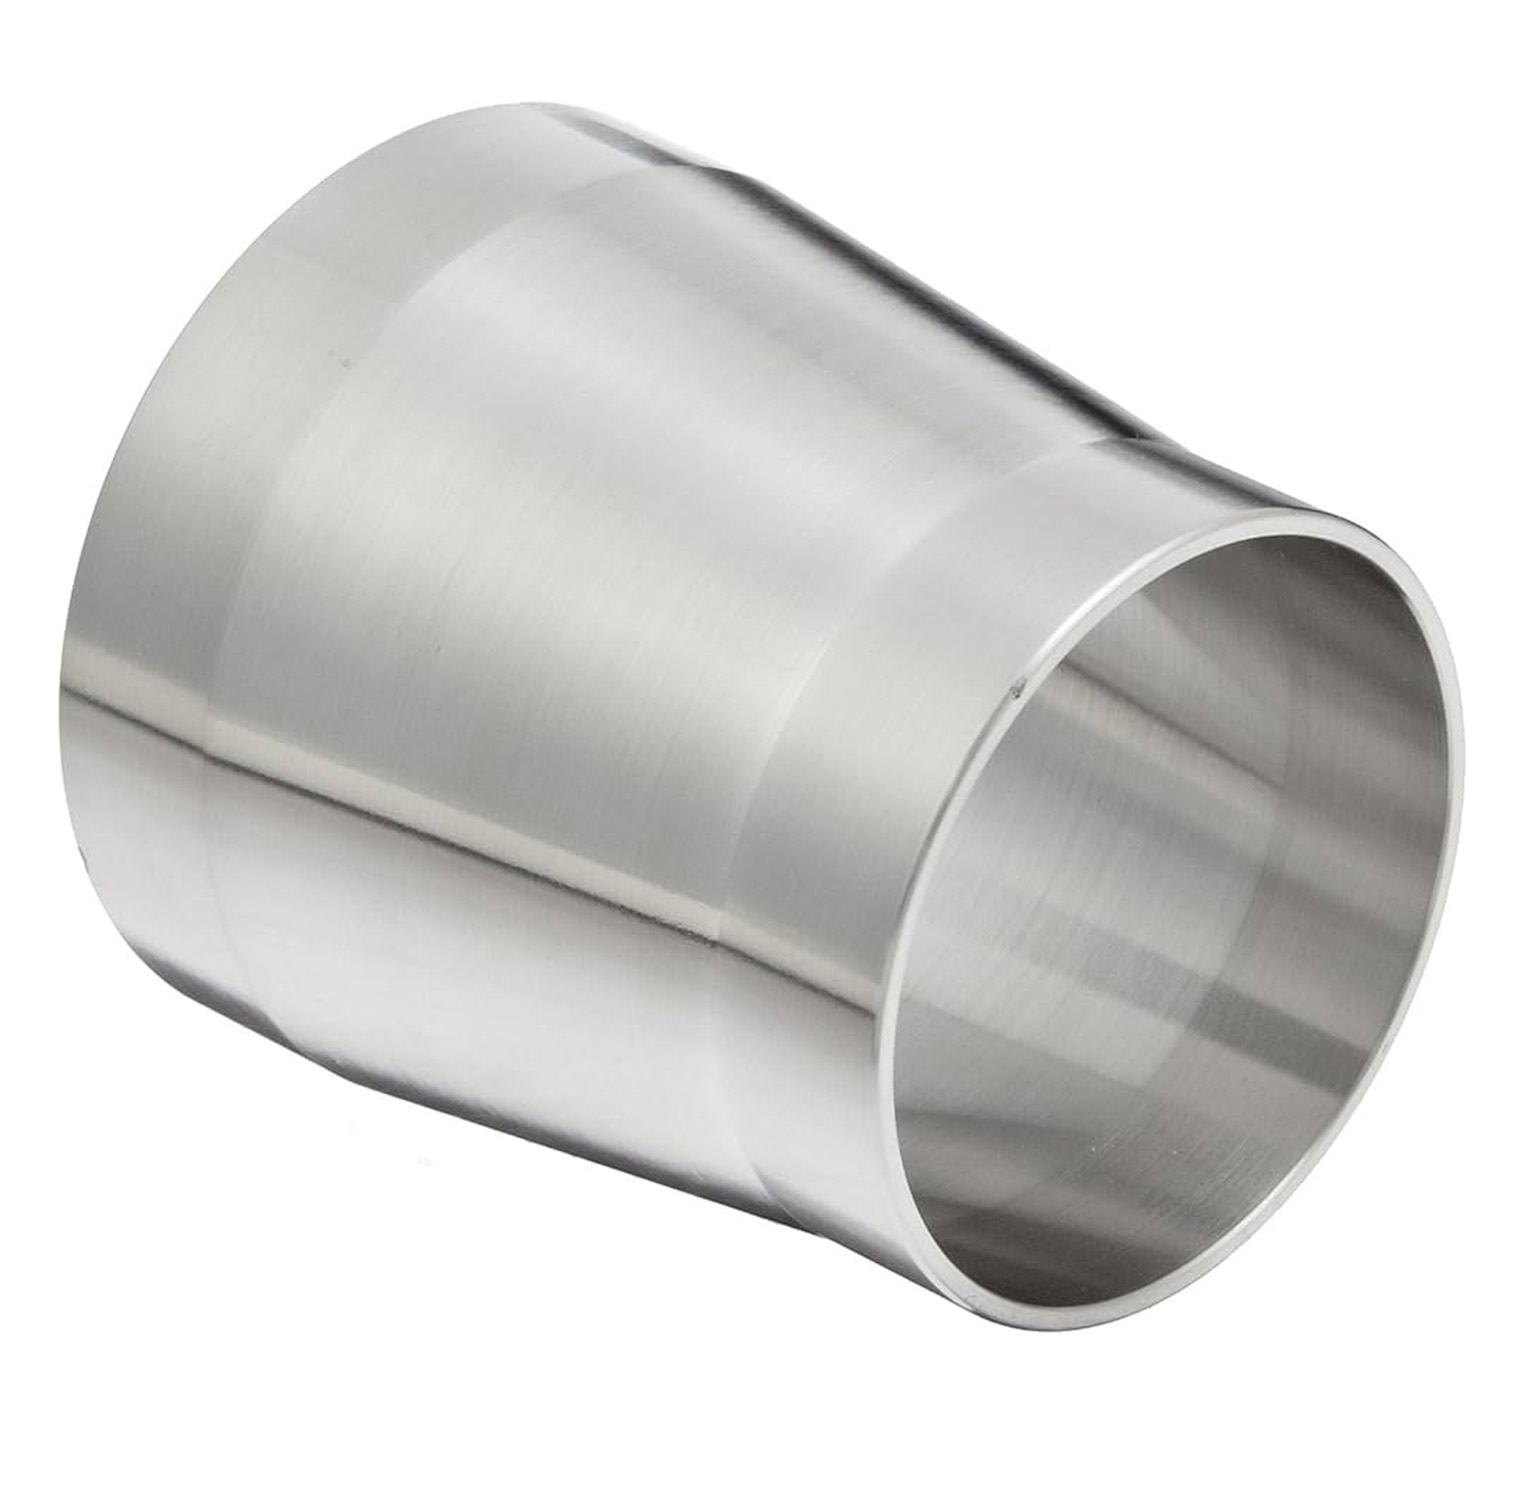 unpolished weld tee t304 Alfa Laval 7W-1 1/2 o.d stainless steel .065 wall thickness 